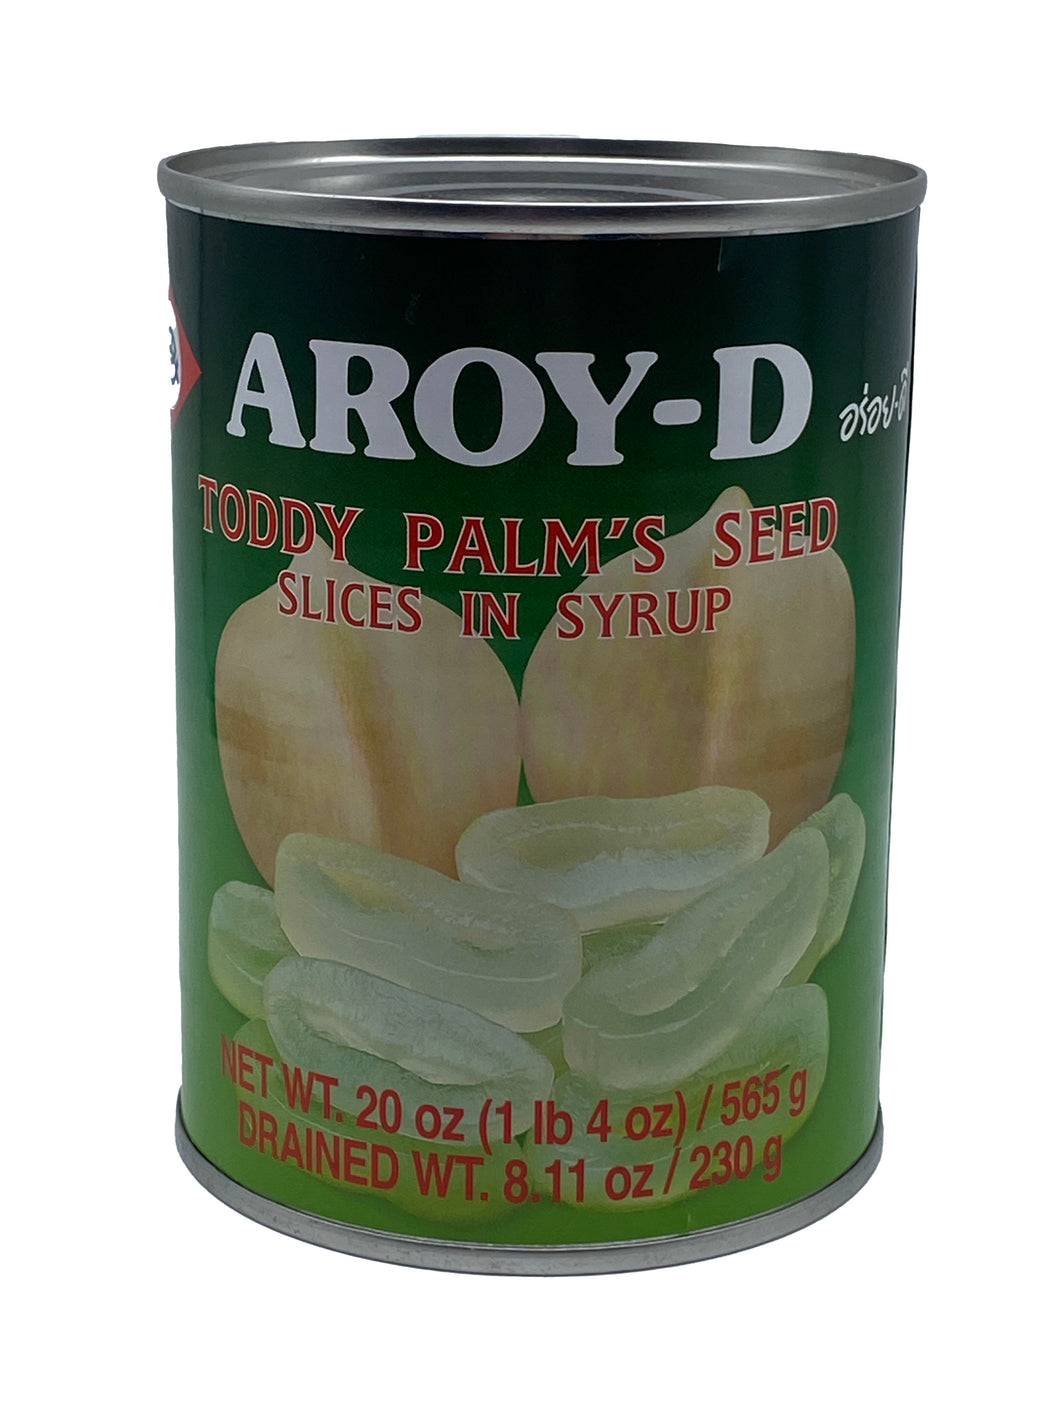 Aroy-D Toddy Palm's Seed Slices in Syrup